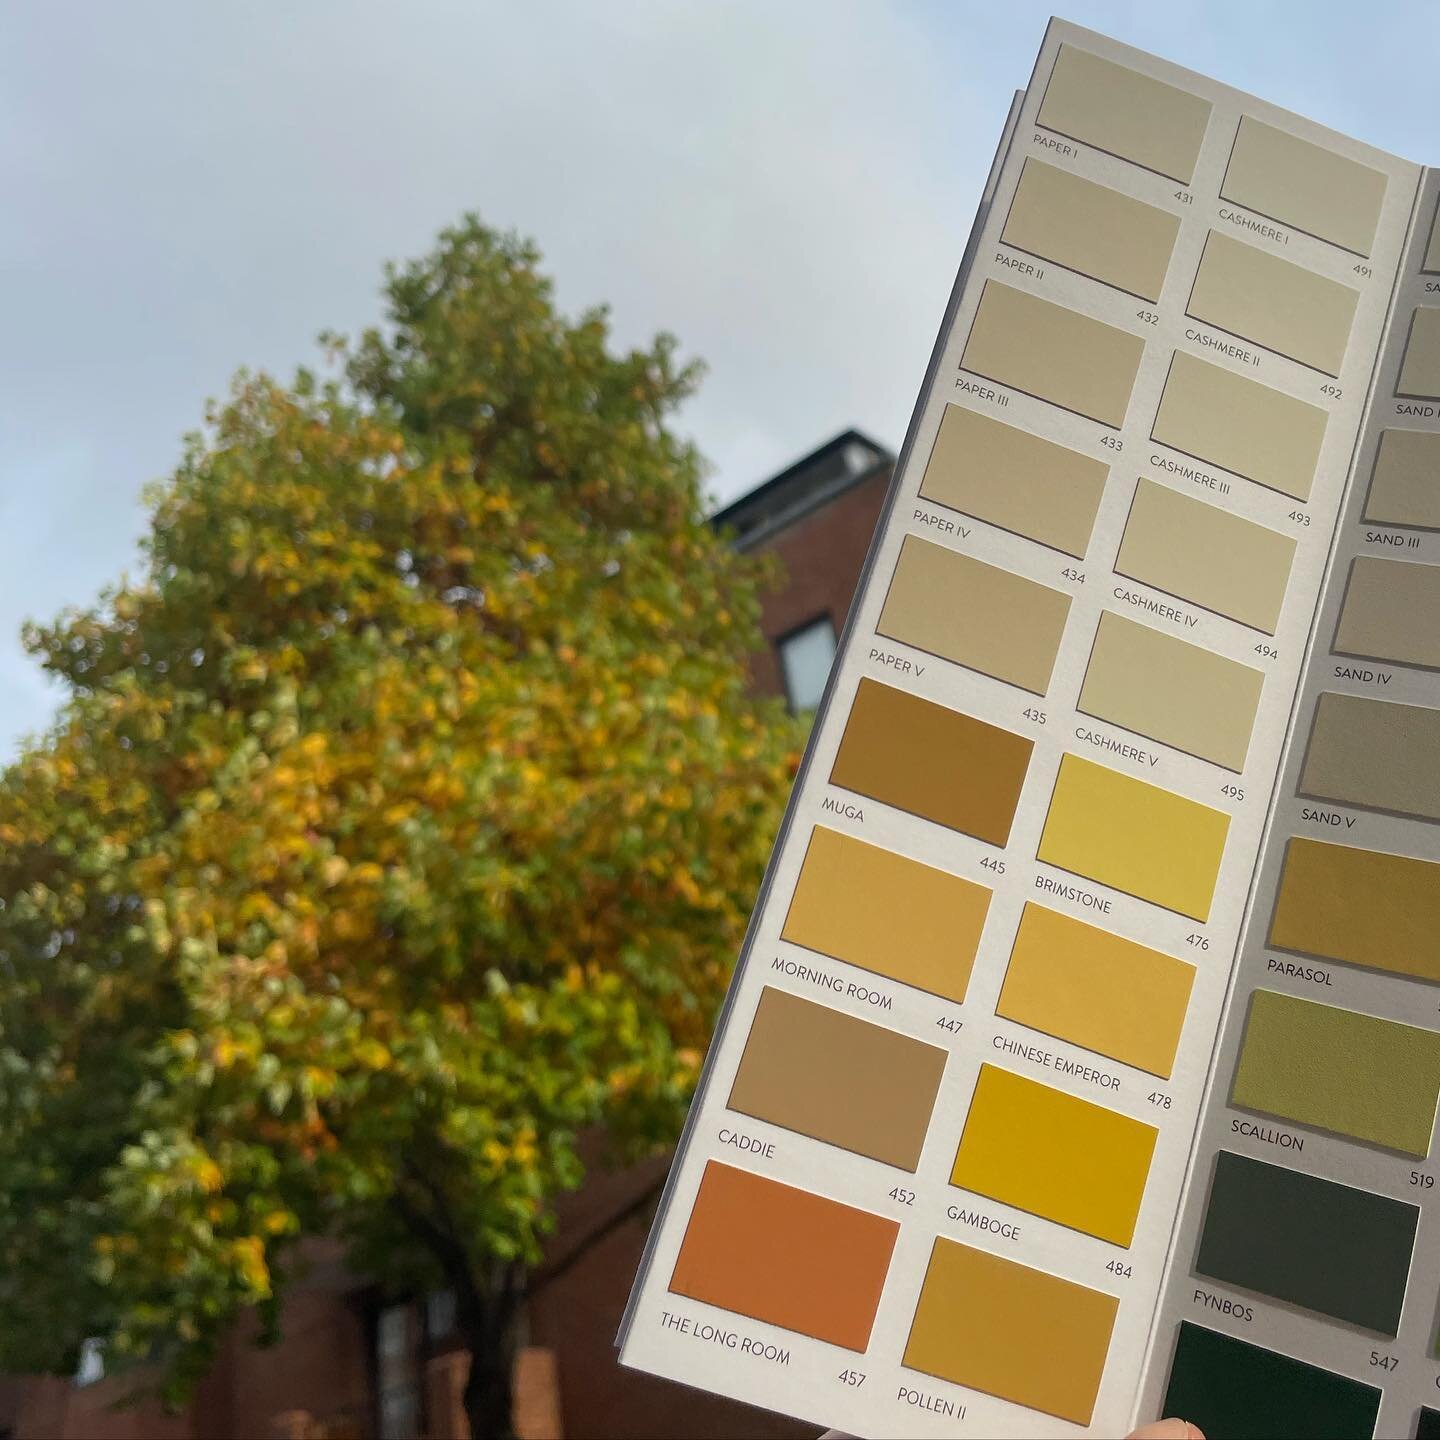 We are LOVING the new additions to the colour chart 😍 Particularly, The Long Room and Pollen II, though that might be because they look like they&rsquo;ve fallen straight from an Autumnal tree 🍁🍂🧡
.
If you want help selecting your next Colour sch